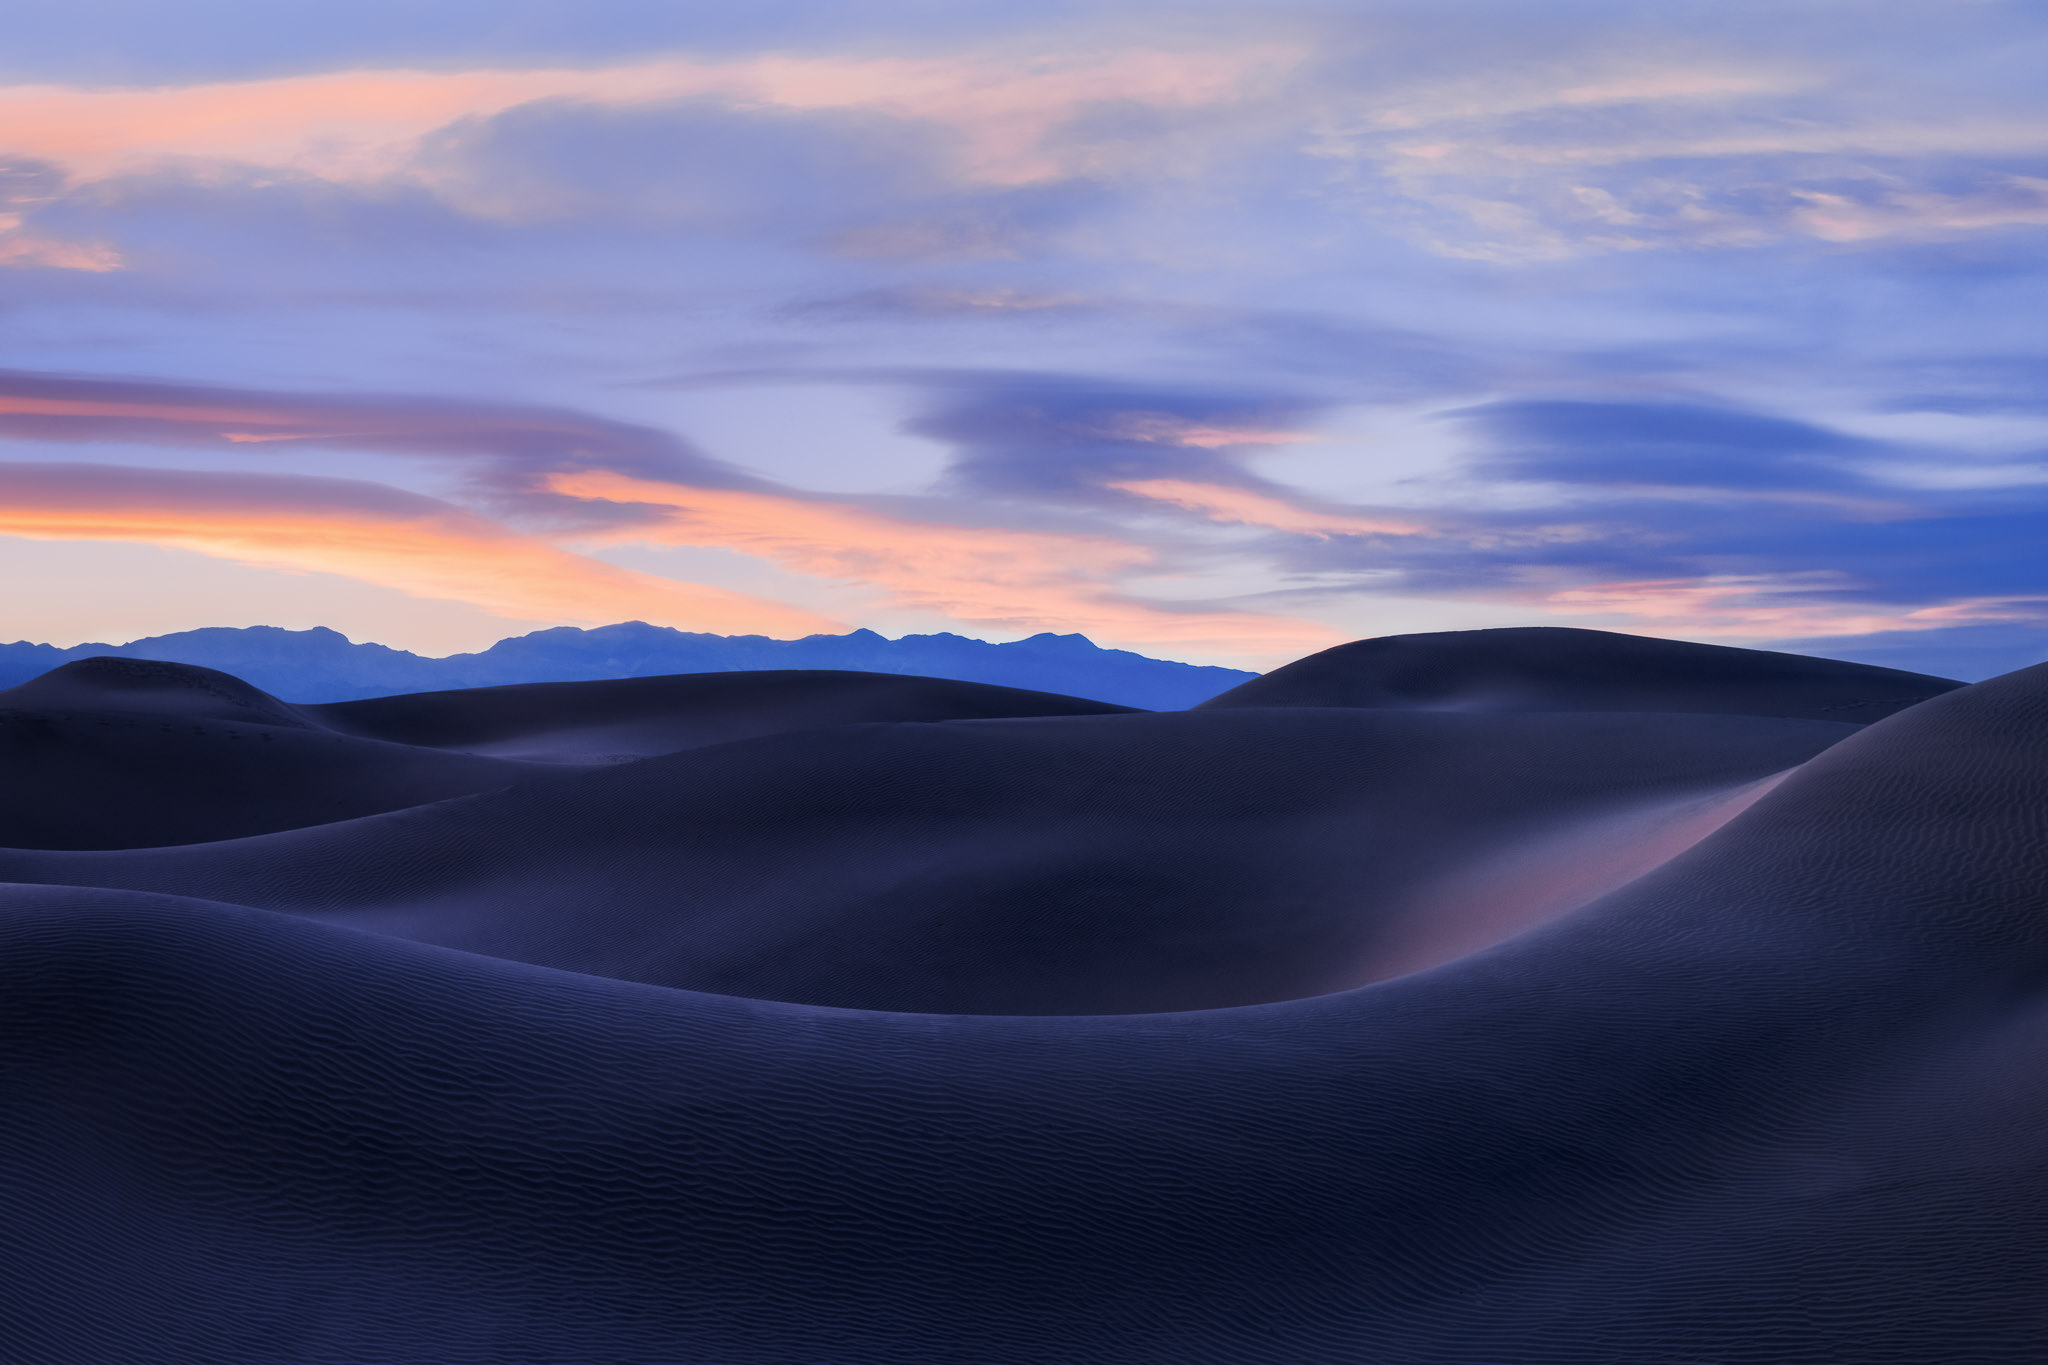 Sand Dunes: Lessons for Photographing One of Nature's Most Dynamic